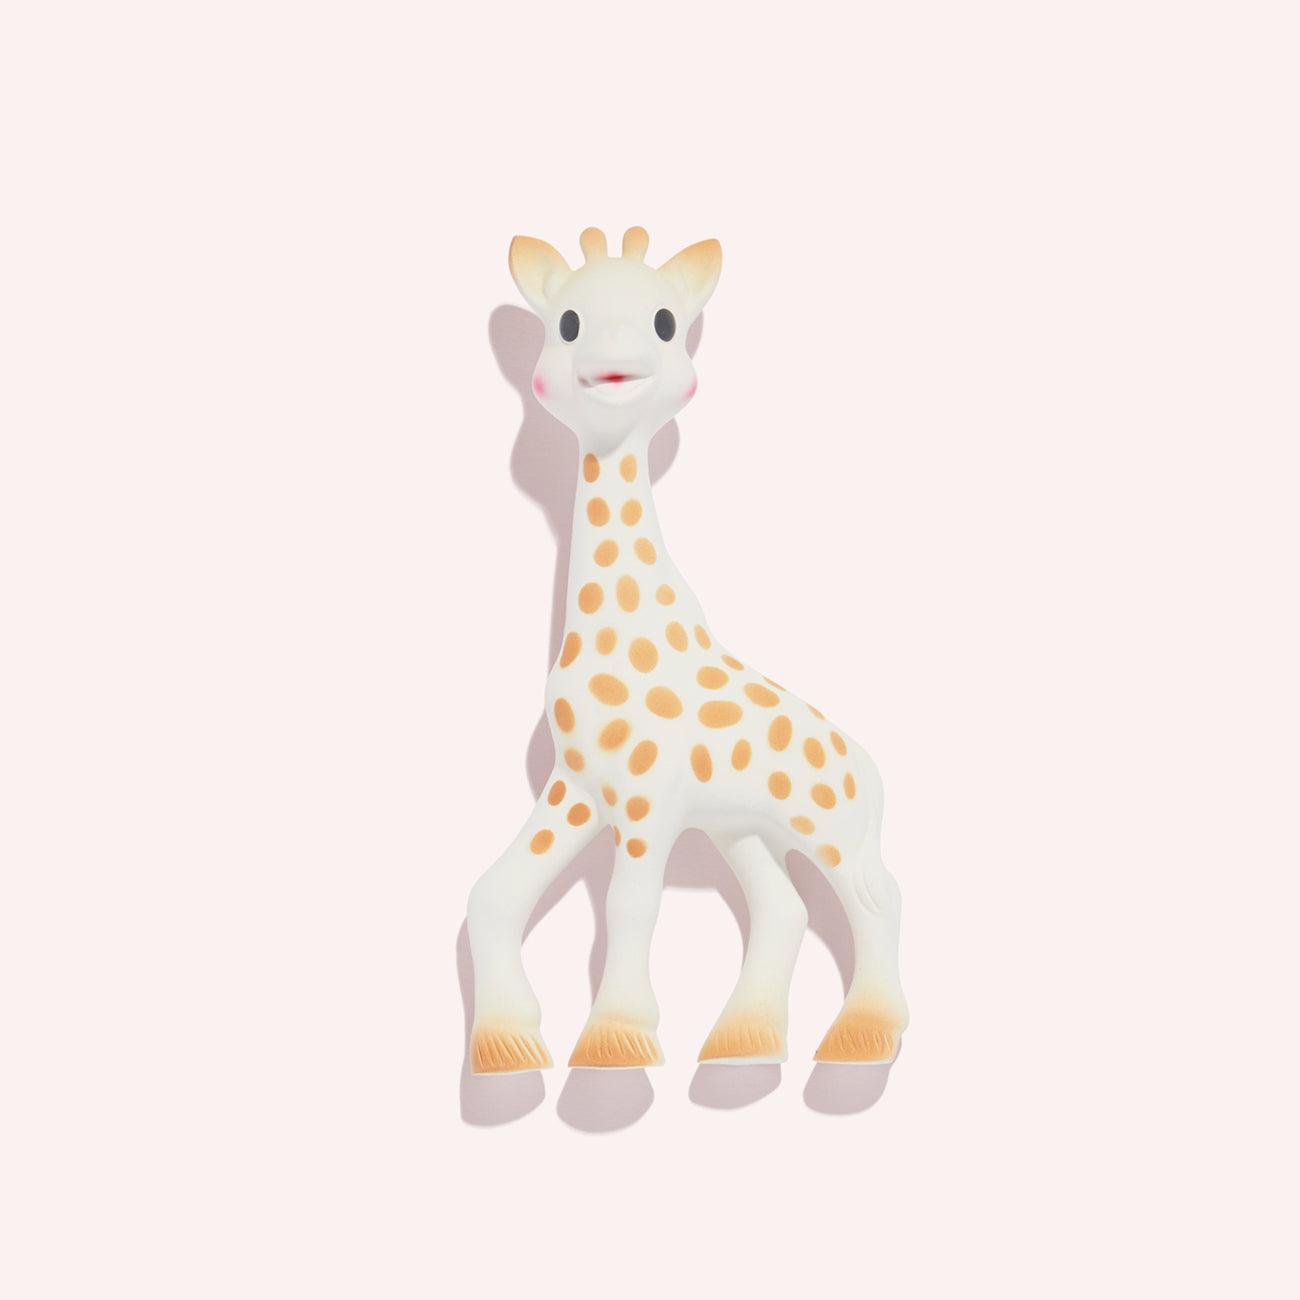 Sophie la girafe | Handcrafted for 60 Years in France | 100% Natural Rubber  | Designed for Teething Babies | Awaken All 5 Senses | Easy to Clean 